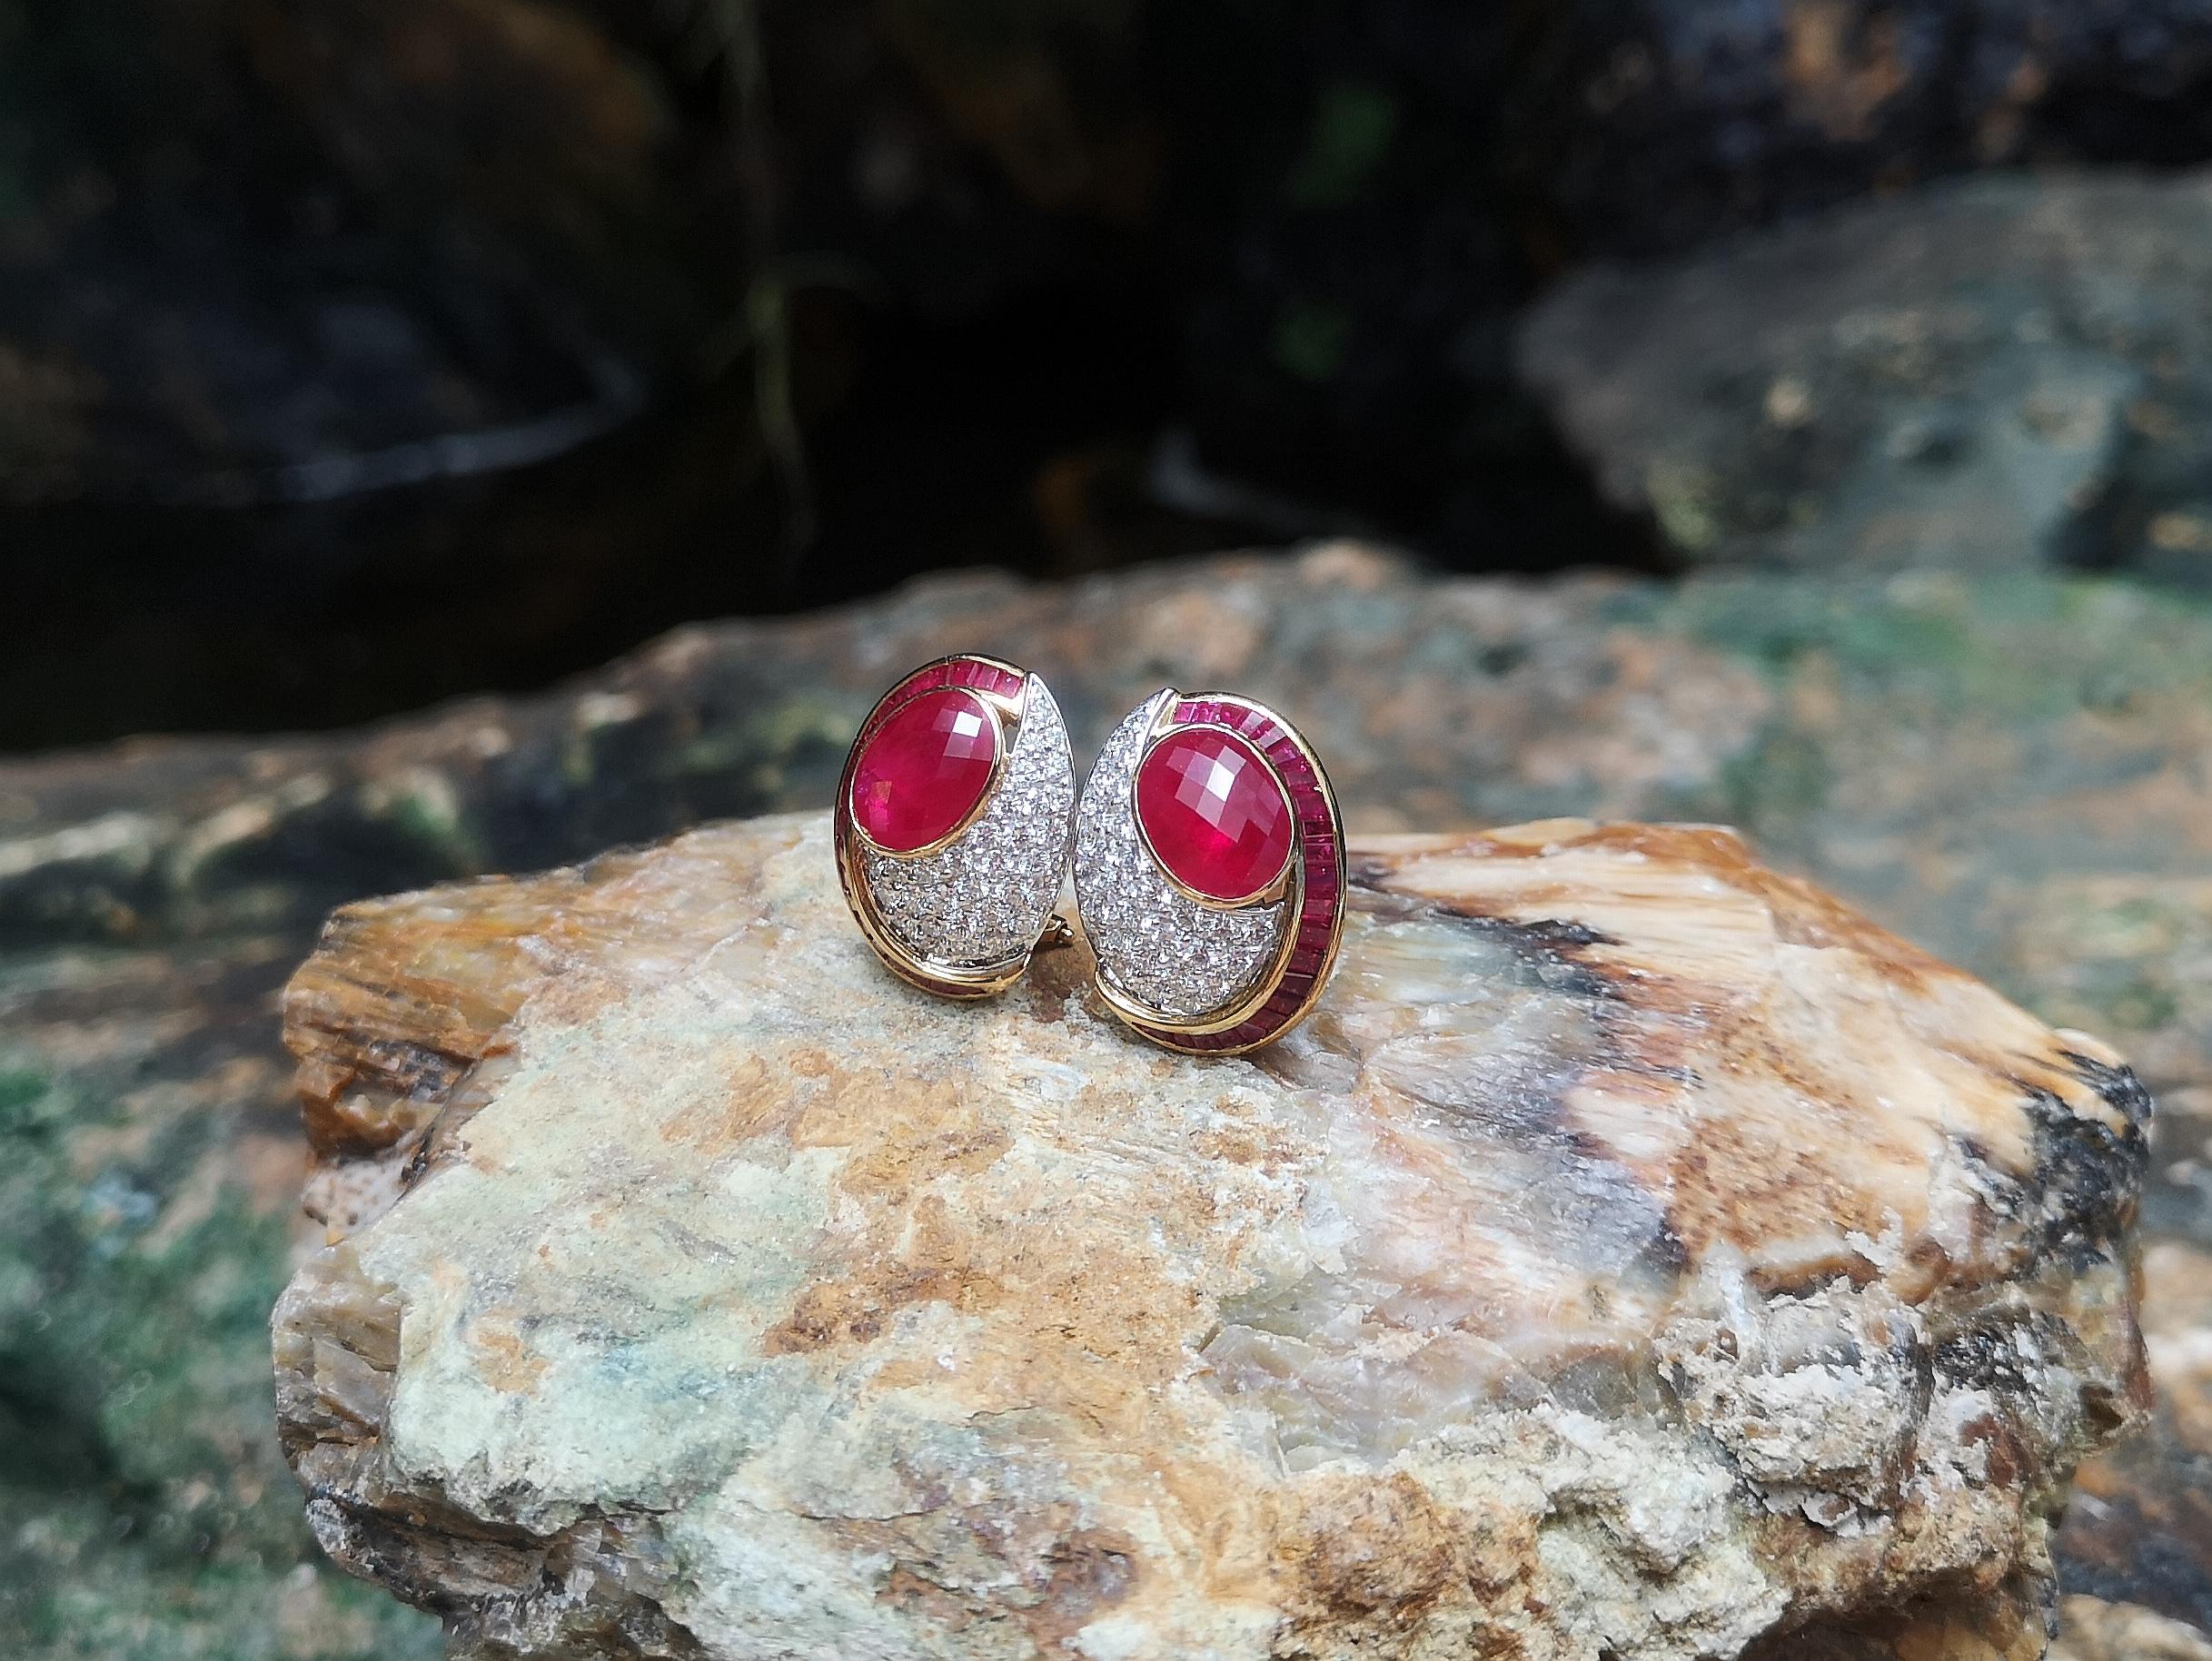 Contemporary Ruby and Diamond Earrings Set in 18 Karat Gold Settings For Sale